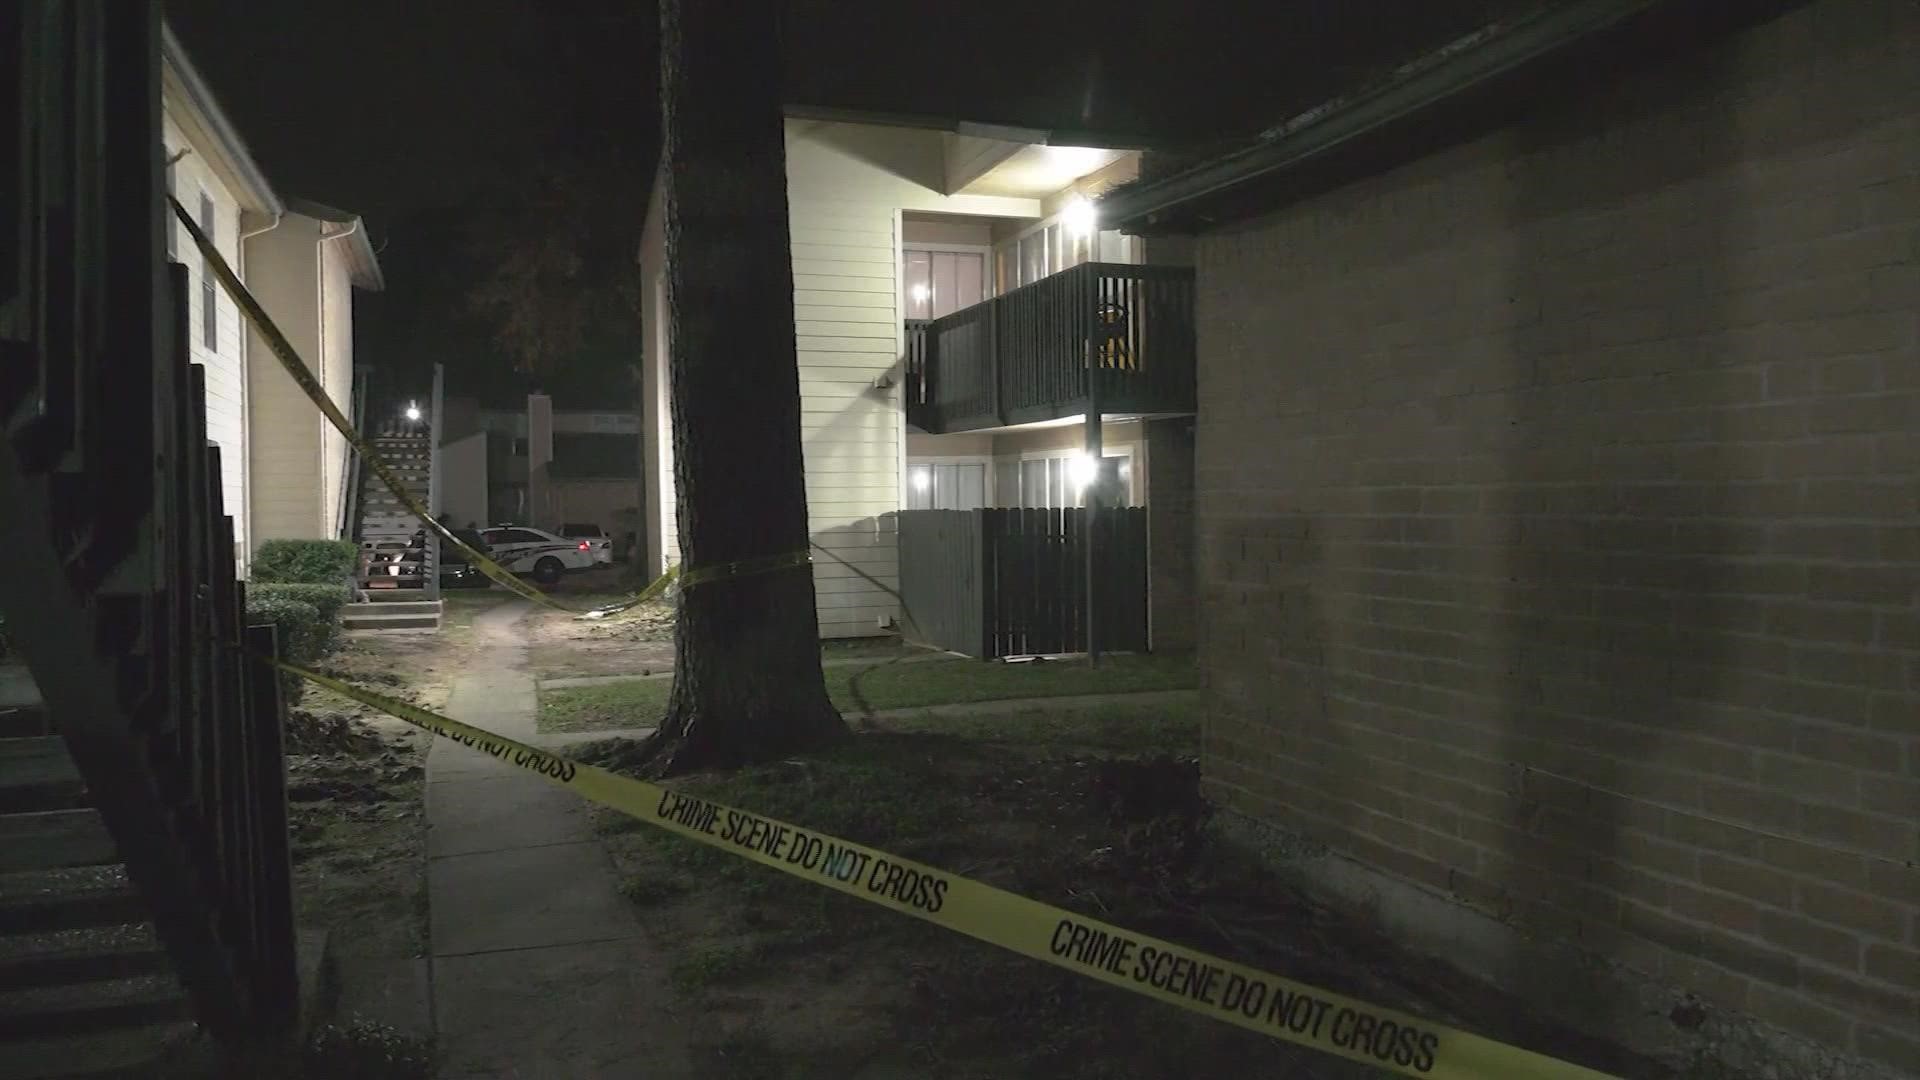 A married couple was found dead in a possible murder-suicide in an apartment in north Harris County late Sunday, according to the Harris County Sheriff’s Office.